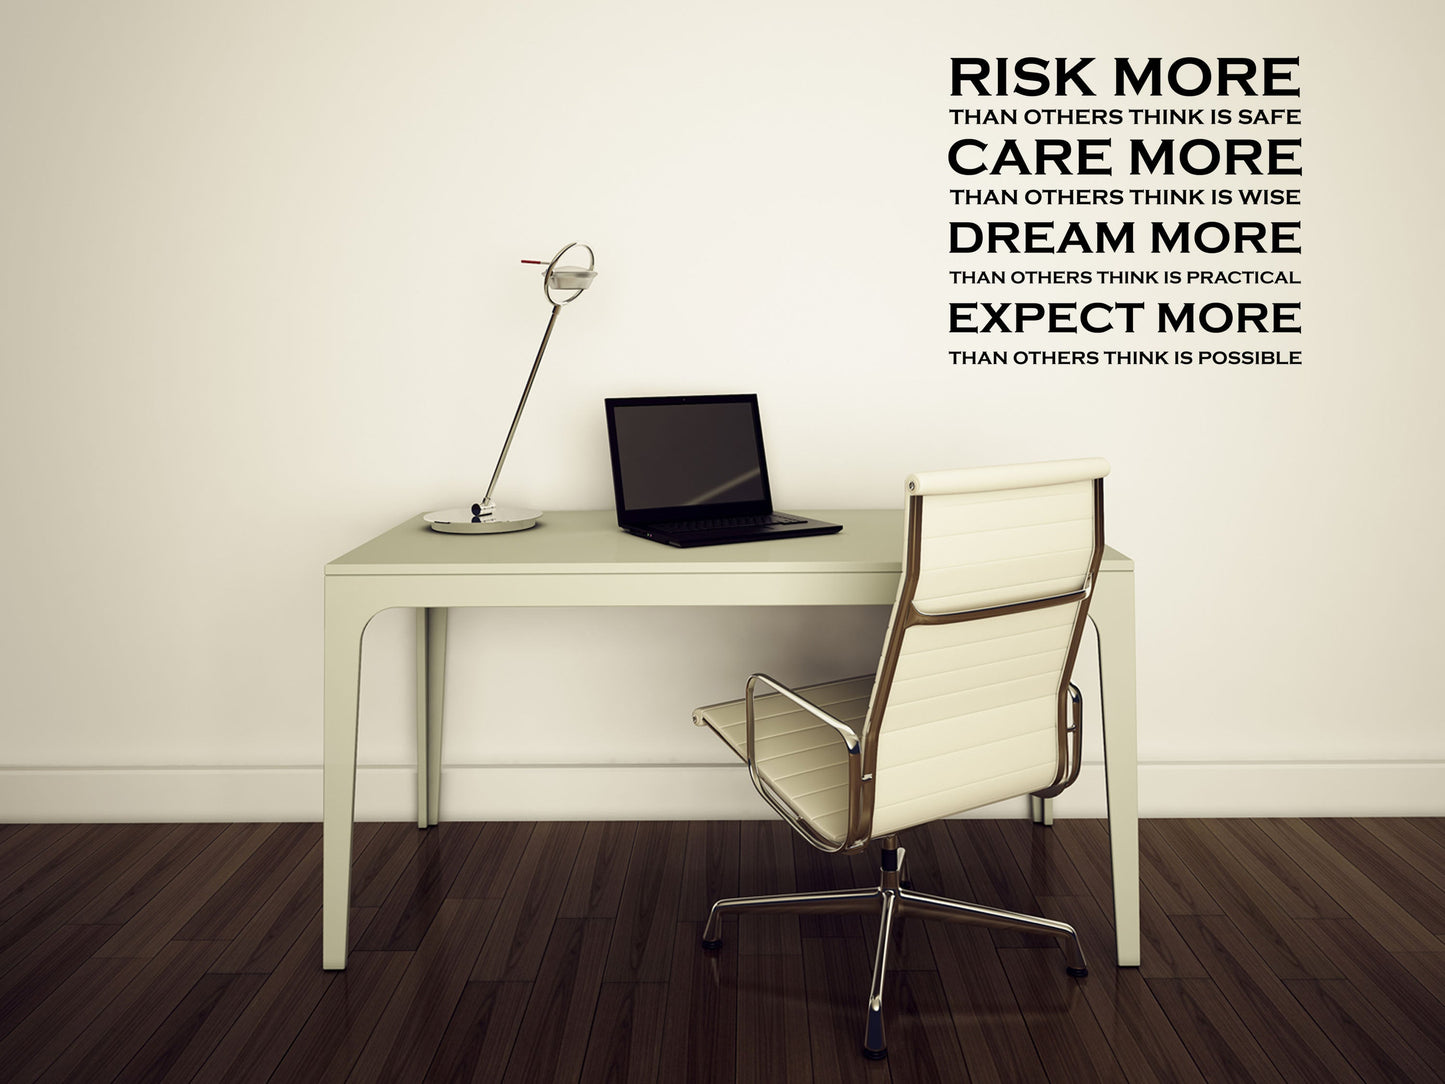 Risk More Care More Dream More Expect More Wall Quote Sticker - Inspirational Wall Decals Vinyl Wall Decal Inspirational Wall Signs 